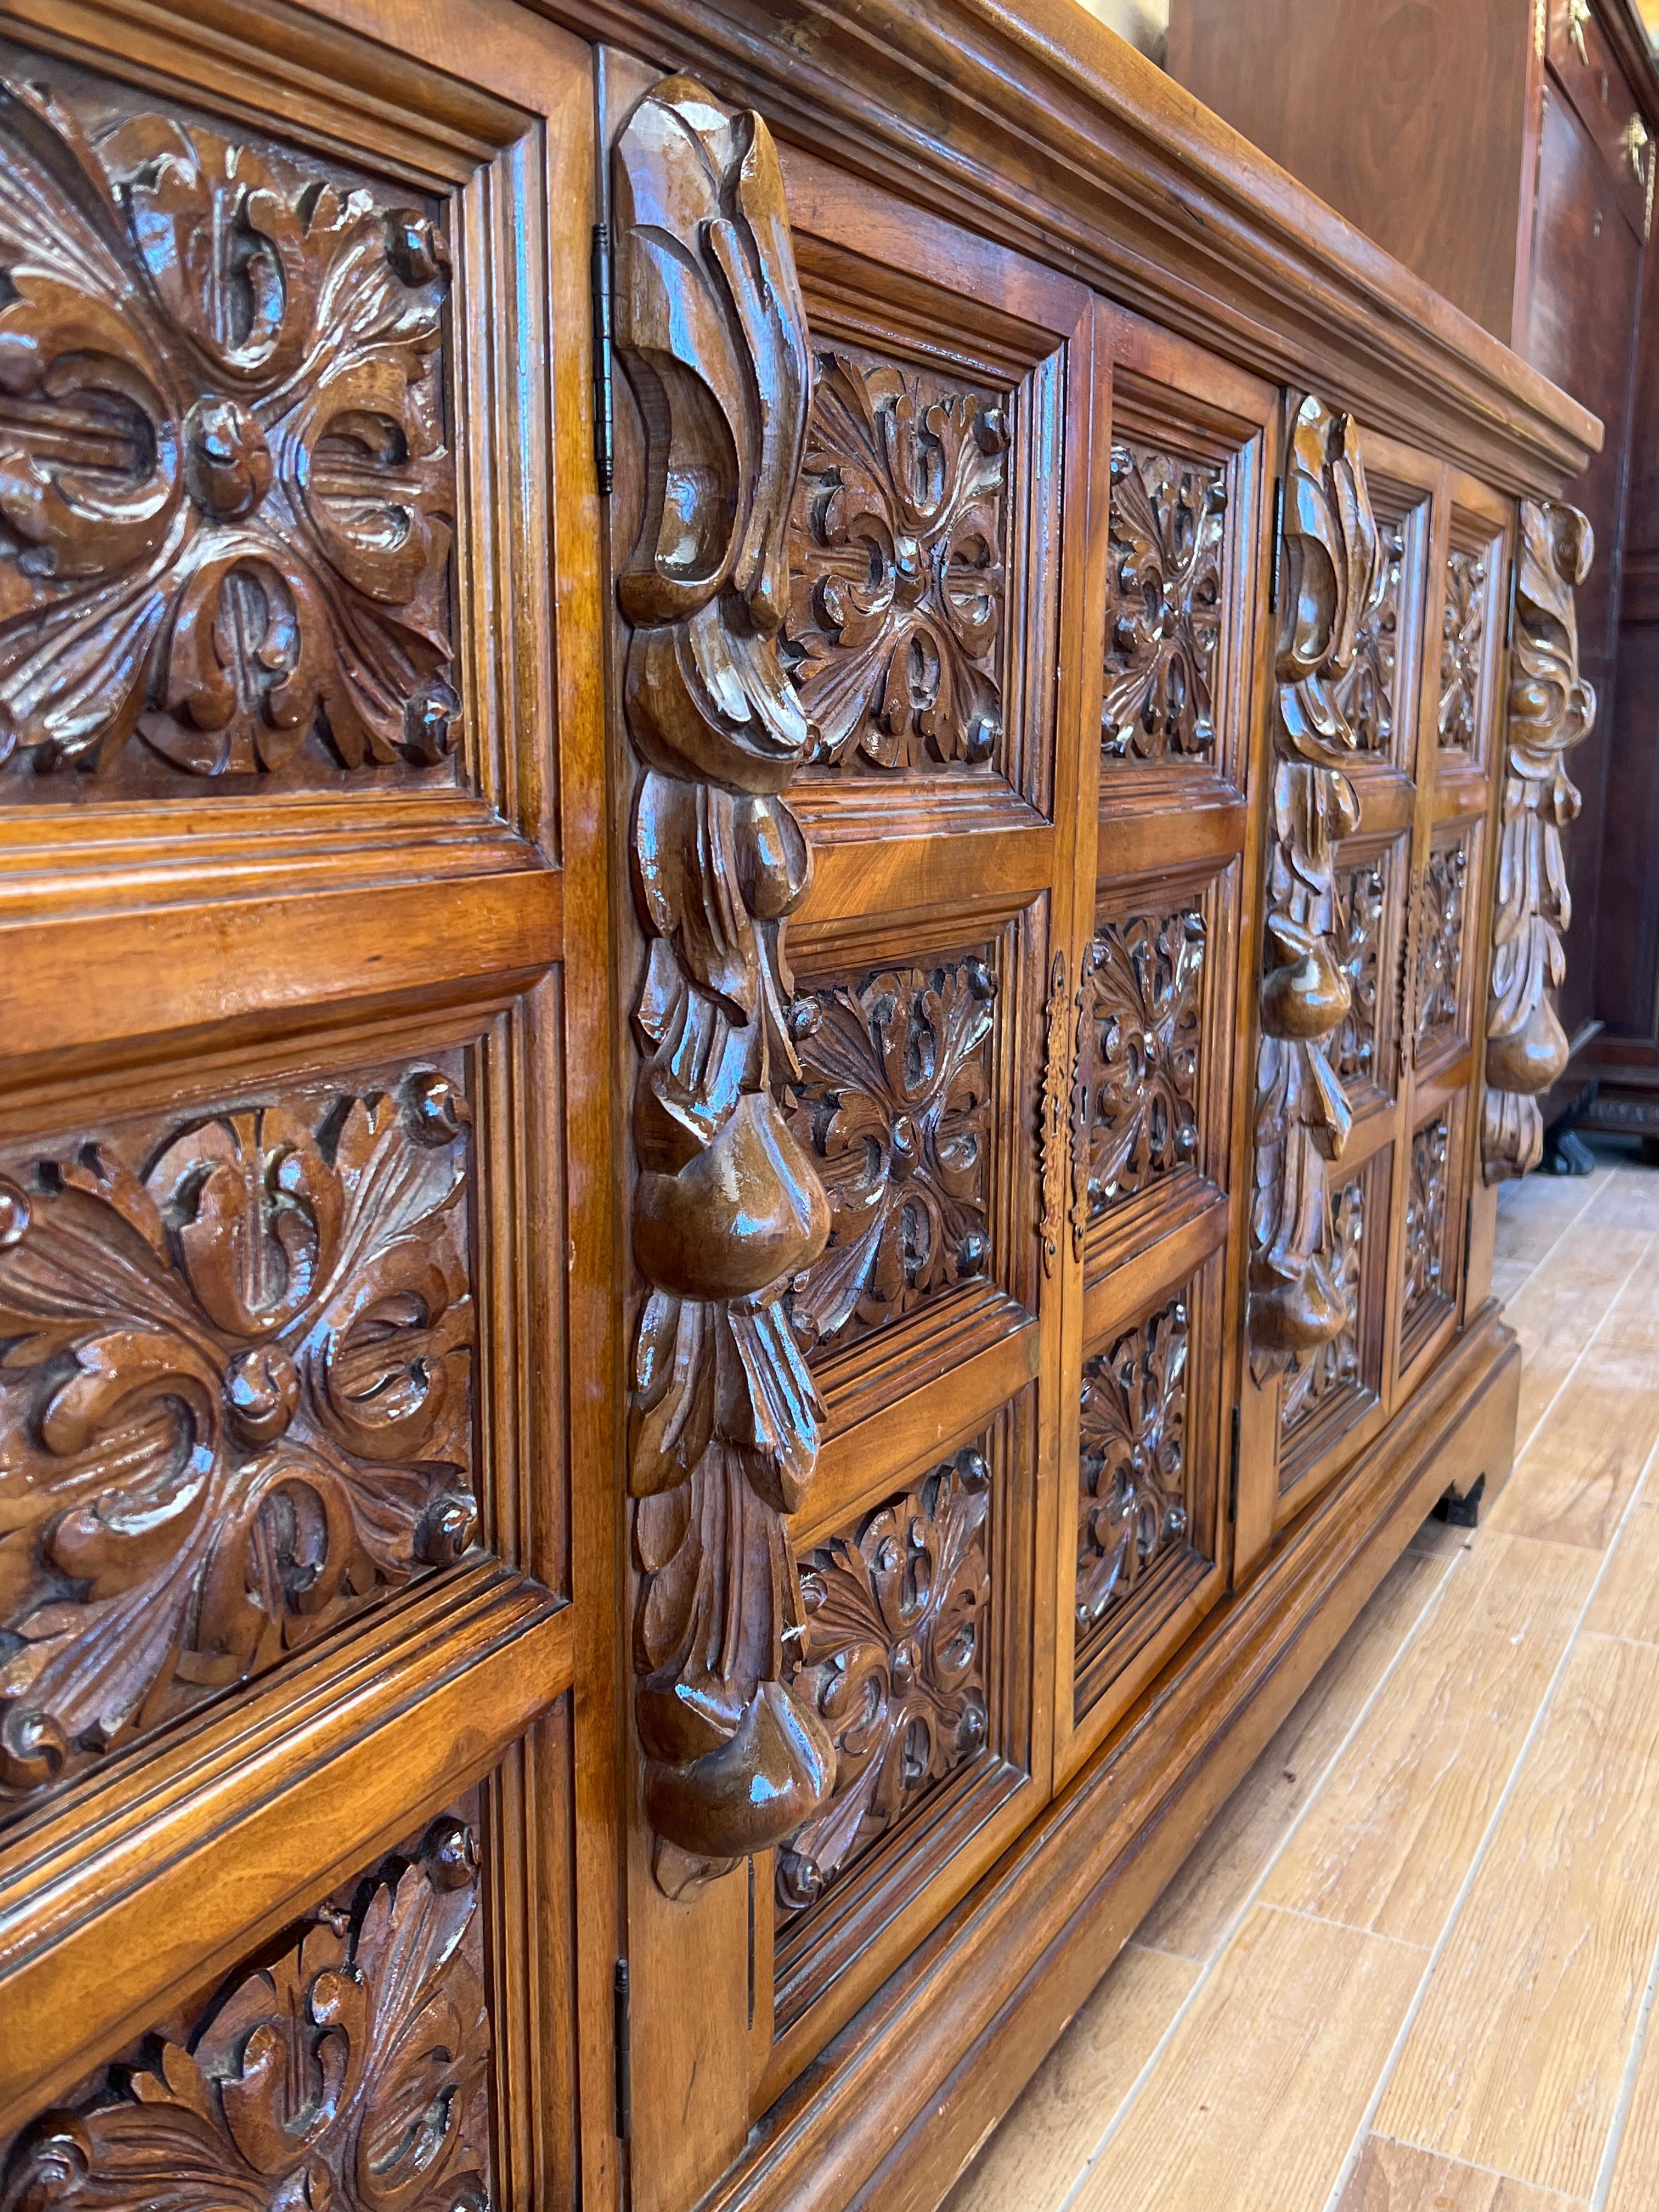 Antique Spanish Carved Walnut Sideboard with Florals Reliefs, circa 1870-1880 For Sale 6